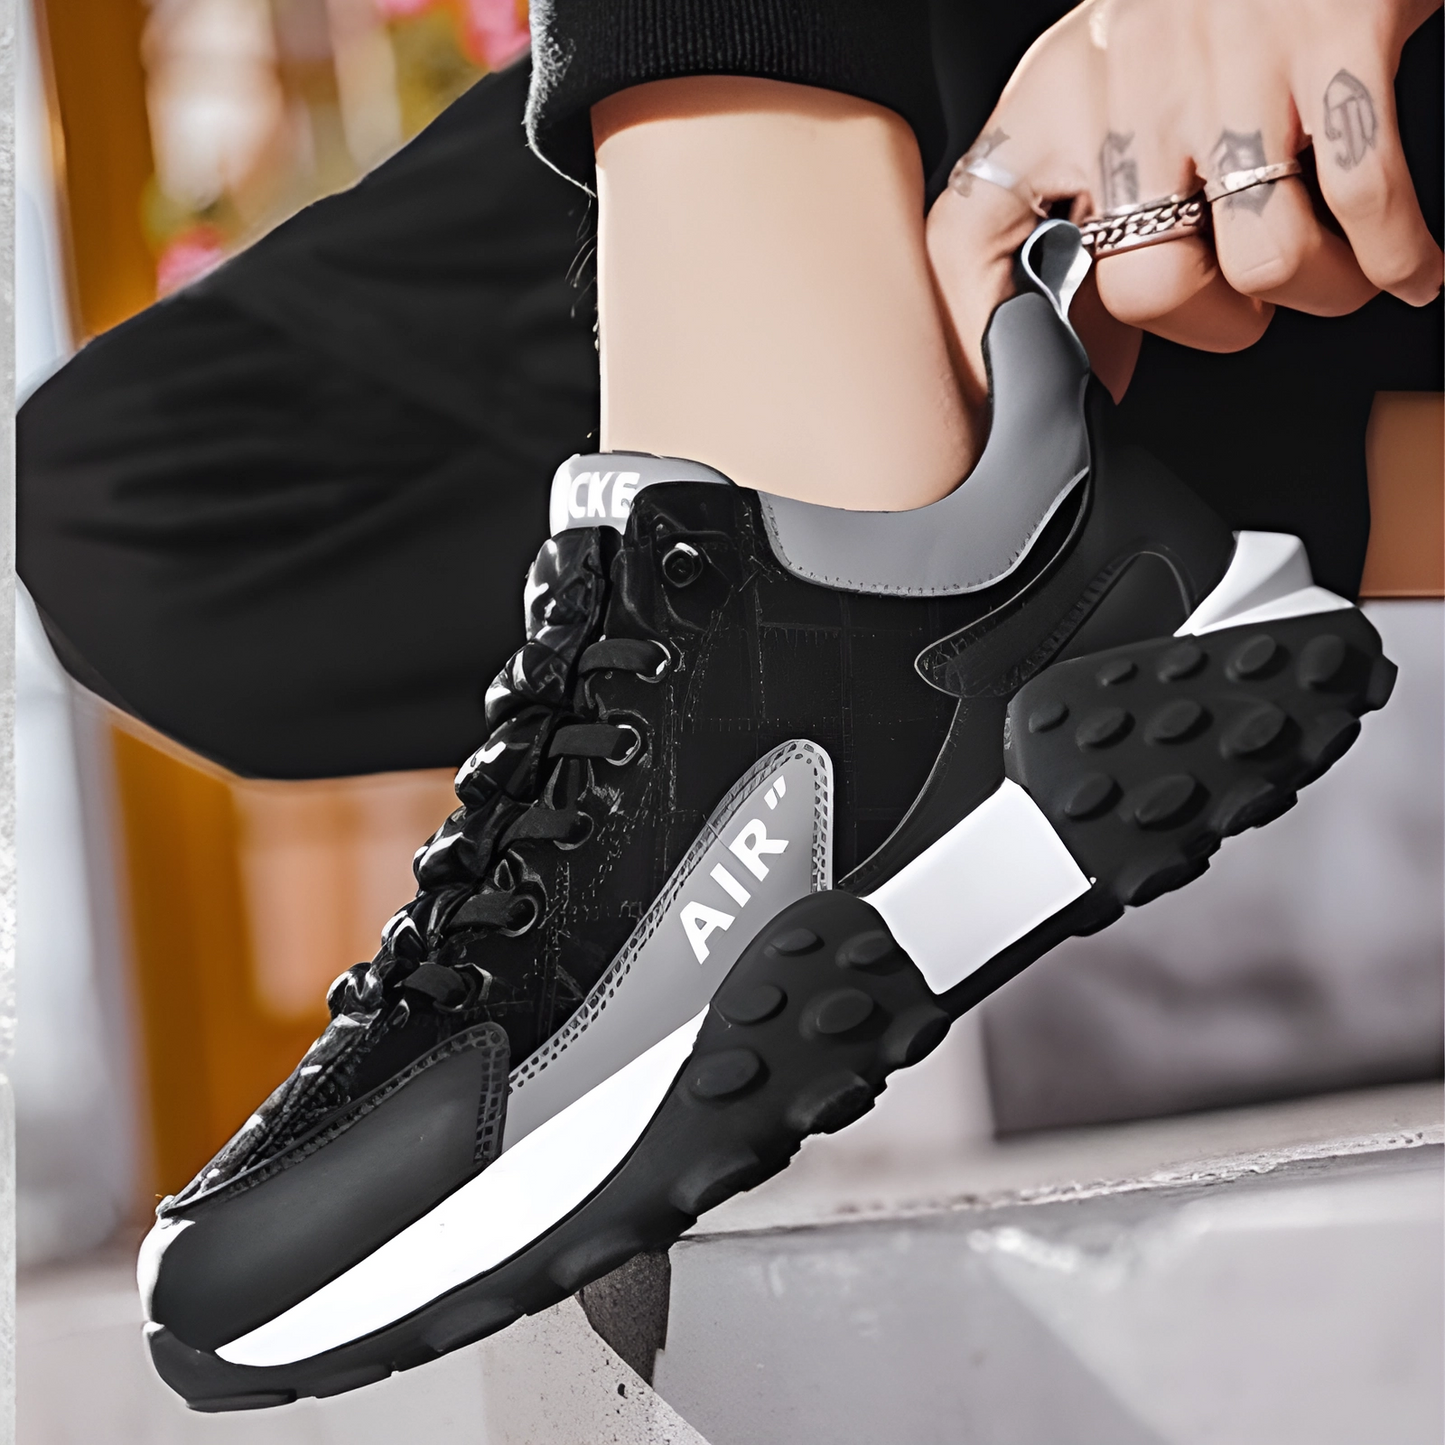 Men Orthopedic Shoes Comfortable Casual Vulcanized Gym Shoes